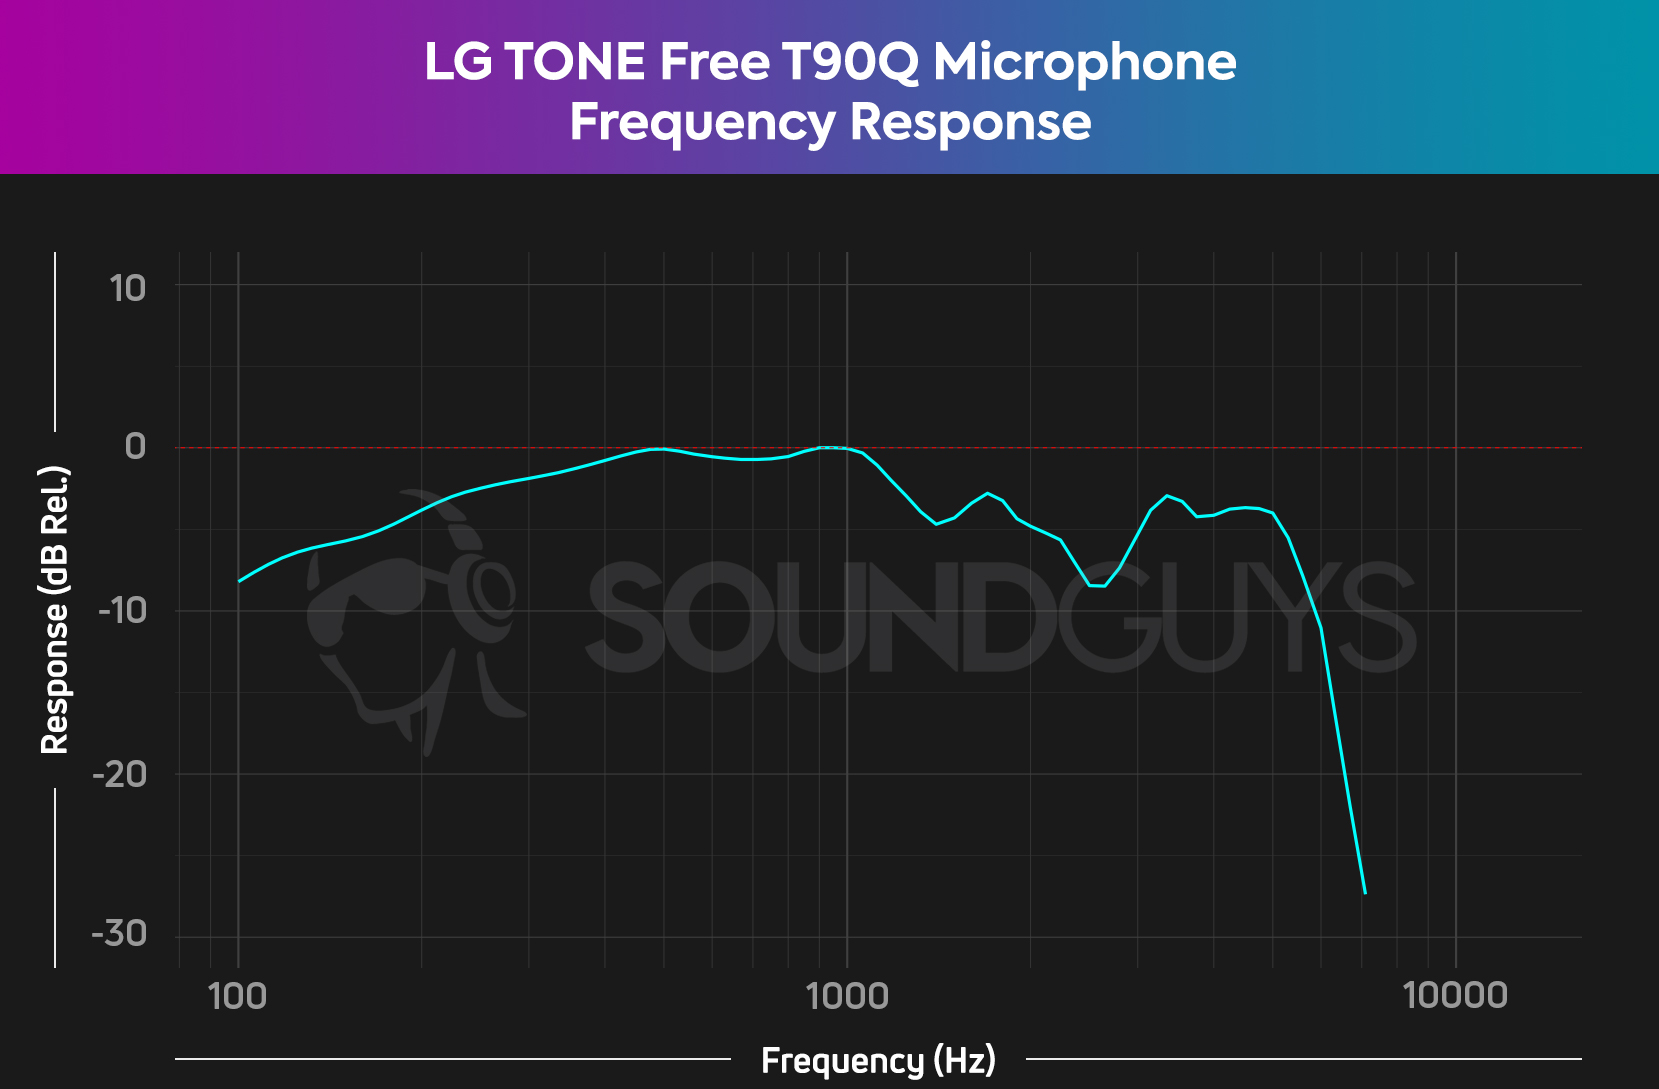 The microphone frequency response chart for the LG TONE Free T90.